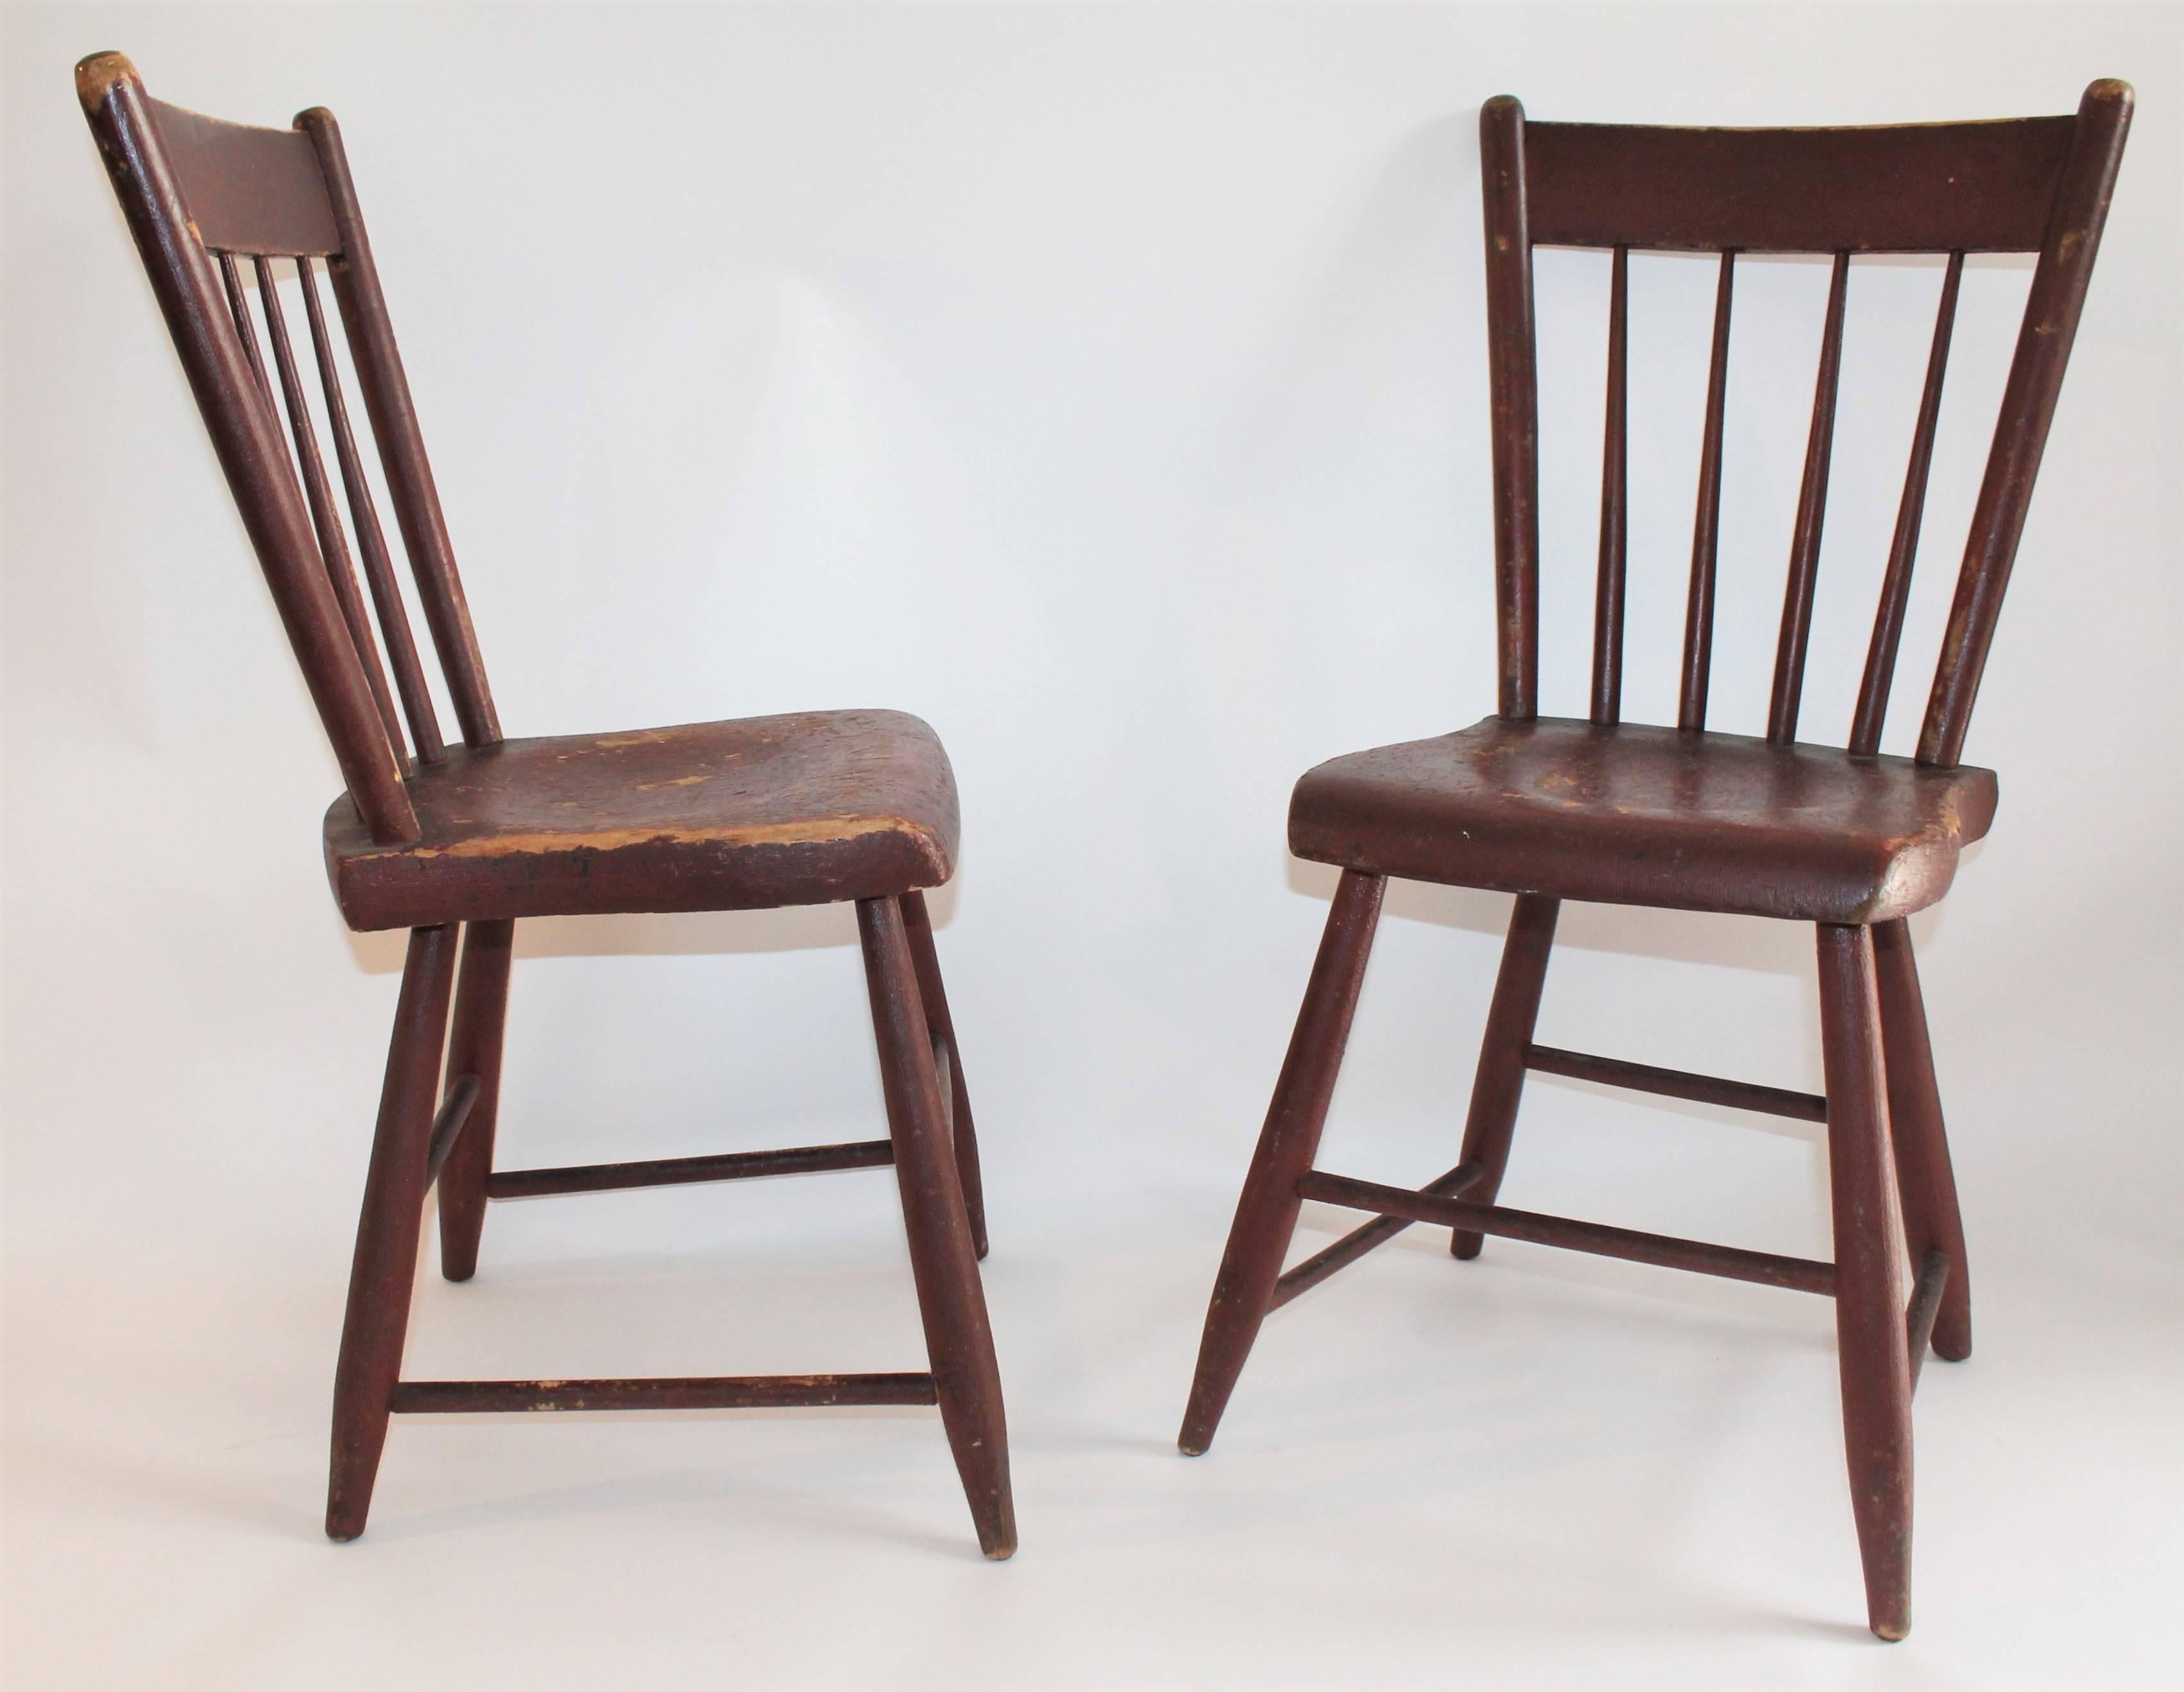 Country 19th Century Original Red Painted Chairs from Pennsylvania, Pair